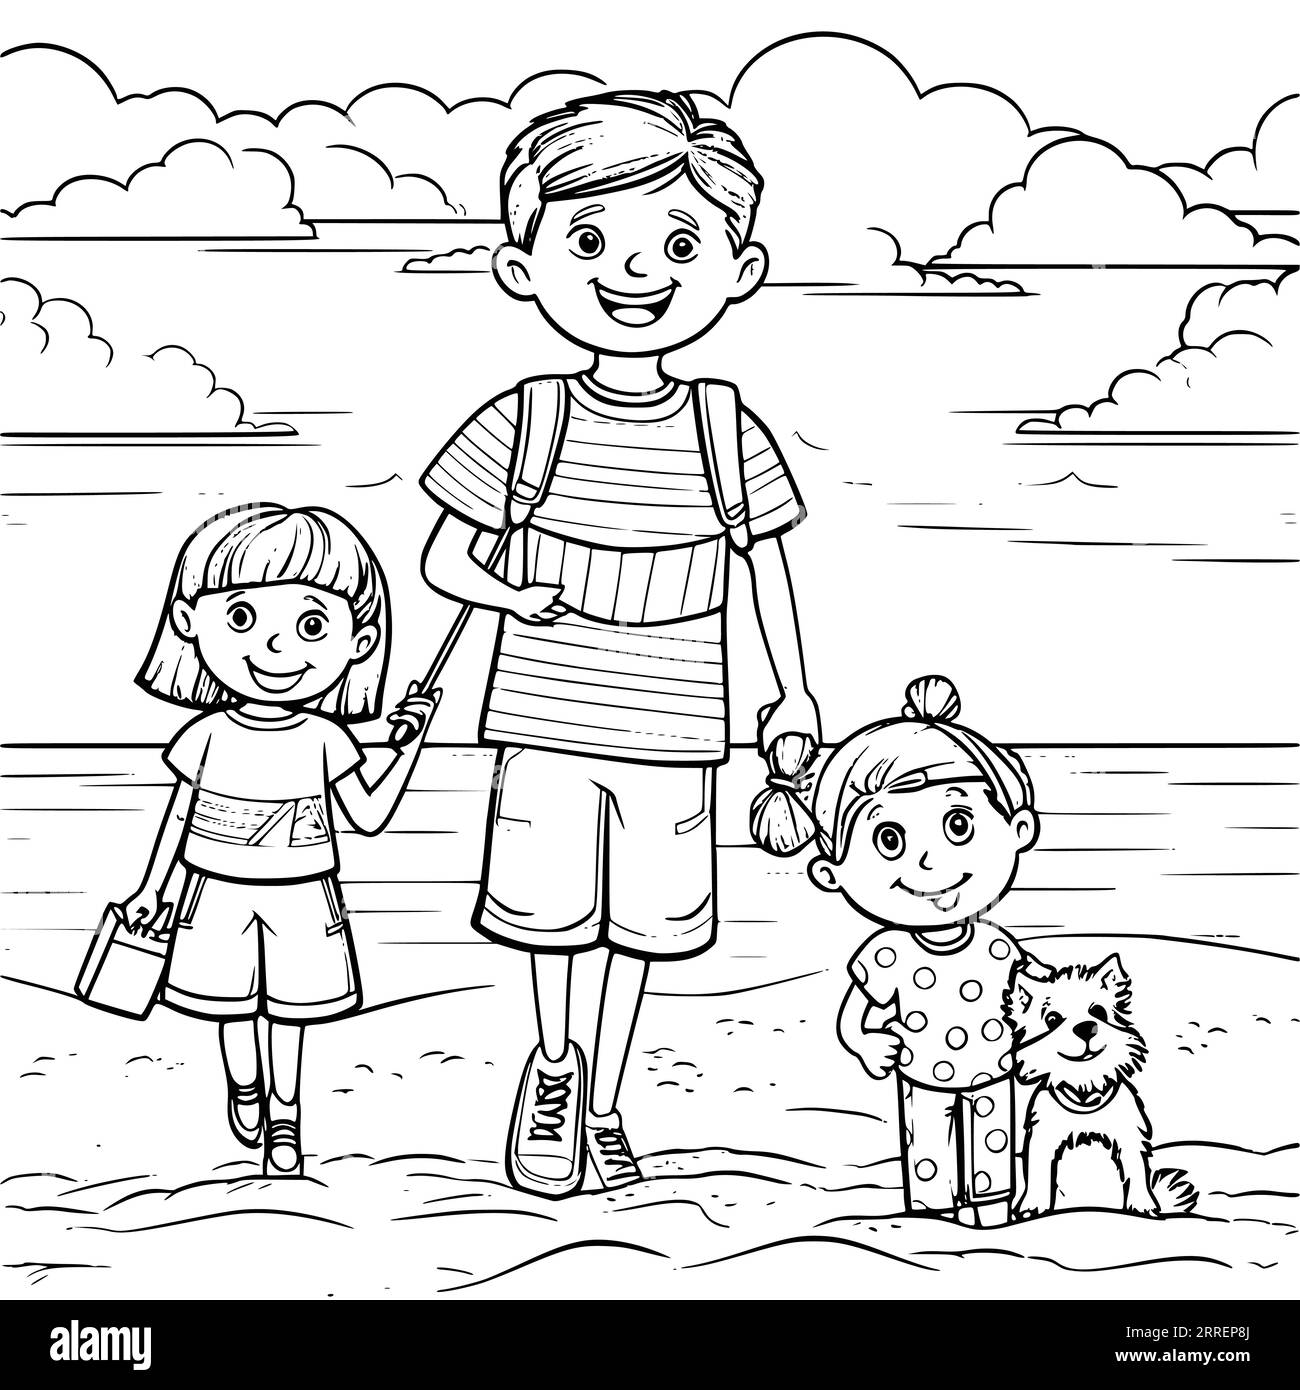 Summer Vacation Coloring Page for Kids Stock Vector